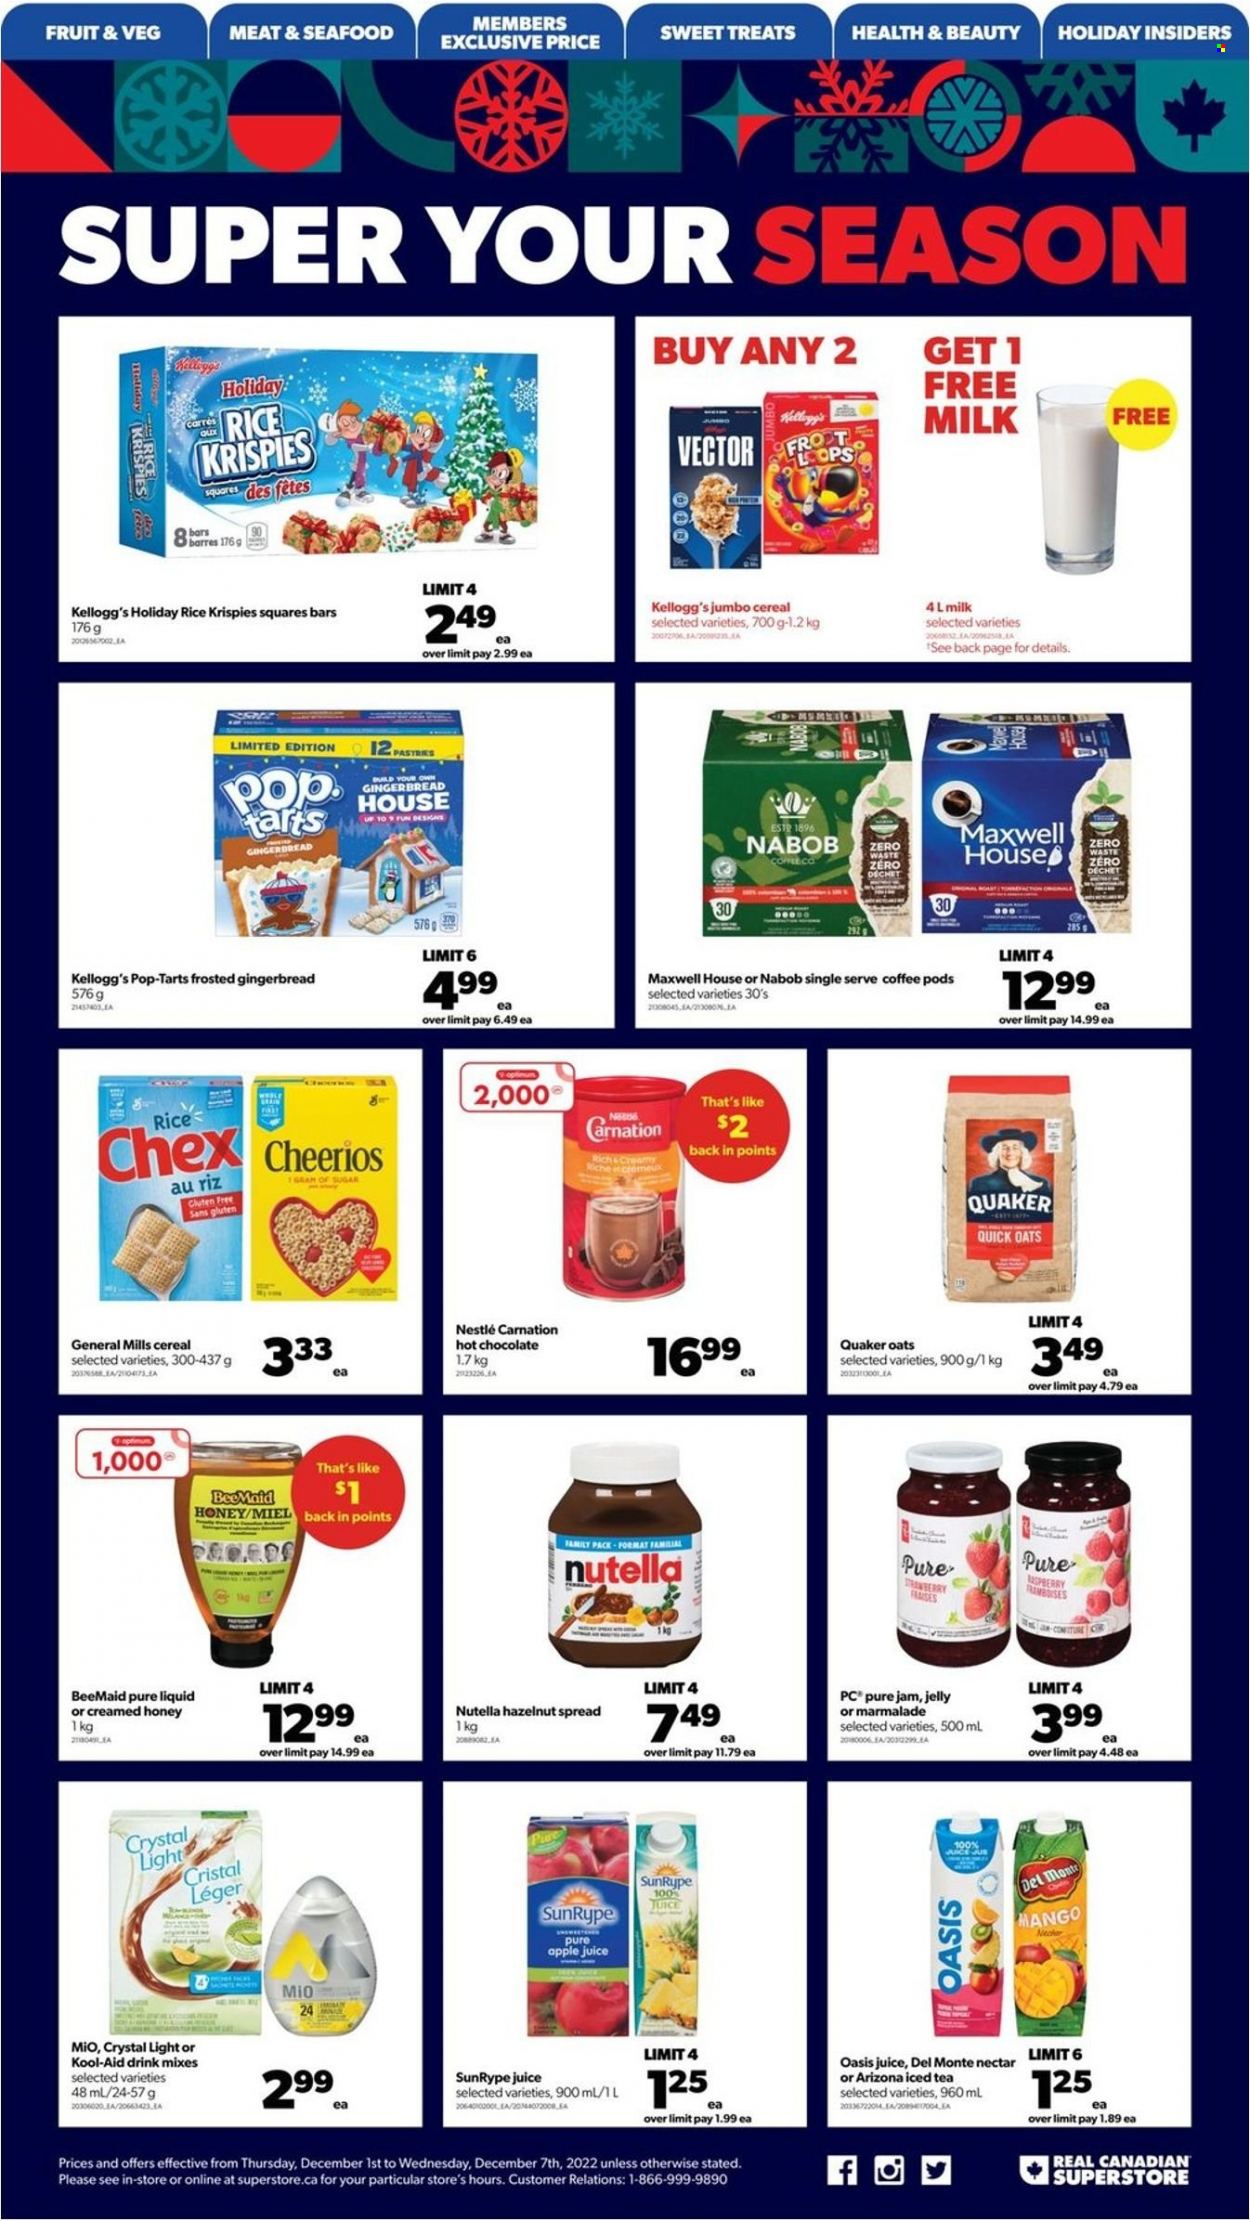 thumbnail - Real Canadian Superstore Flyer - December 01, 2022 - December 07, 2022 - Sales products - gingerbread, mango, seafood, Quaker, milk, jelly, Kellogg's, Pop-Tarts, sugar, oats, Del Monte, cereals, Cheerios, Rice Krispies, Quick Oats, honey, fruit jam, hazelnut spread, apple juice, juice, ice tea, AriZona, hot chocolate, Maxwell House, coffee, coffee pods, Nestlé, Nutella. Page 15.